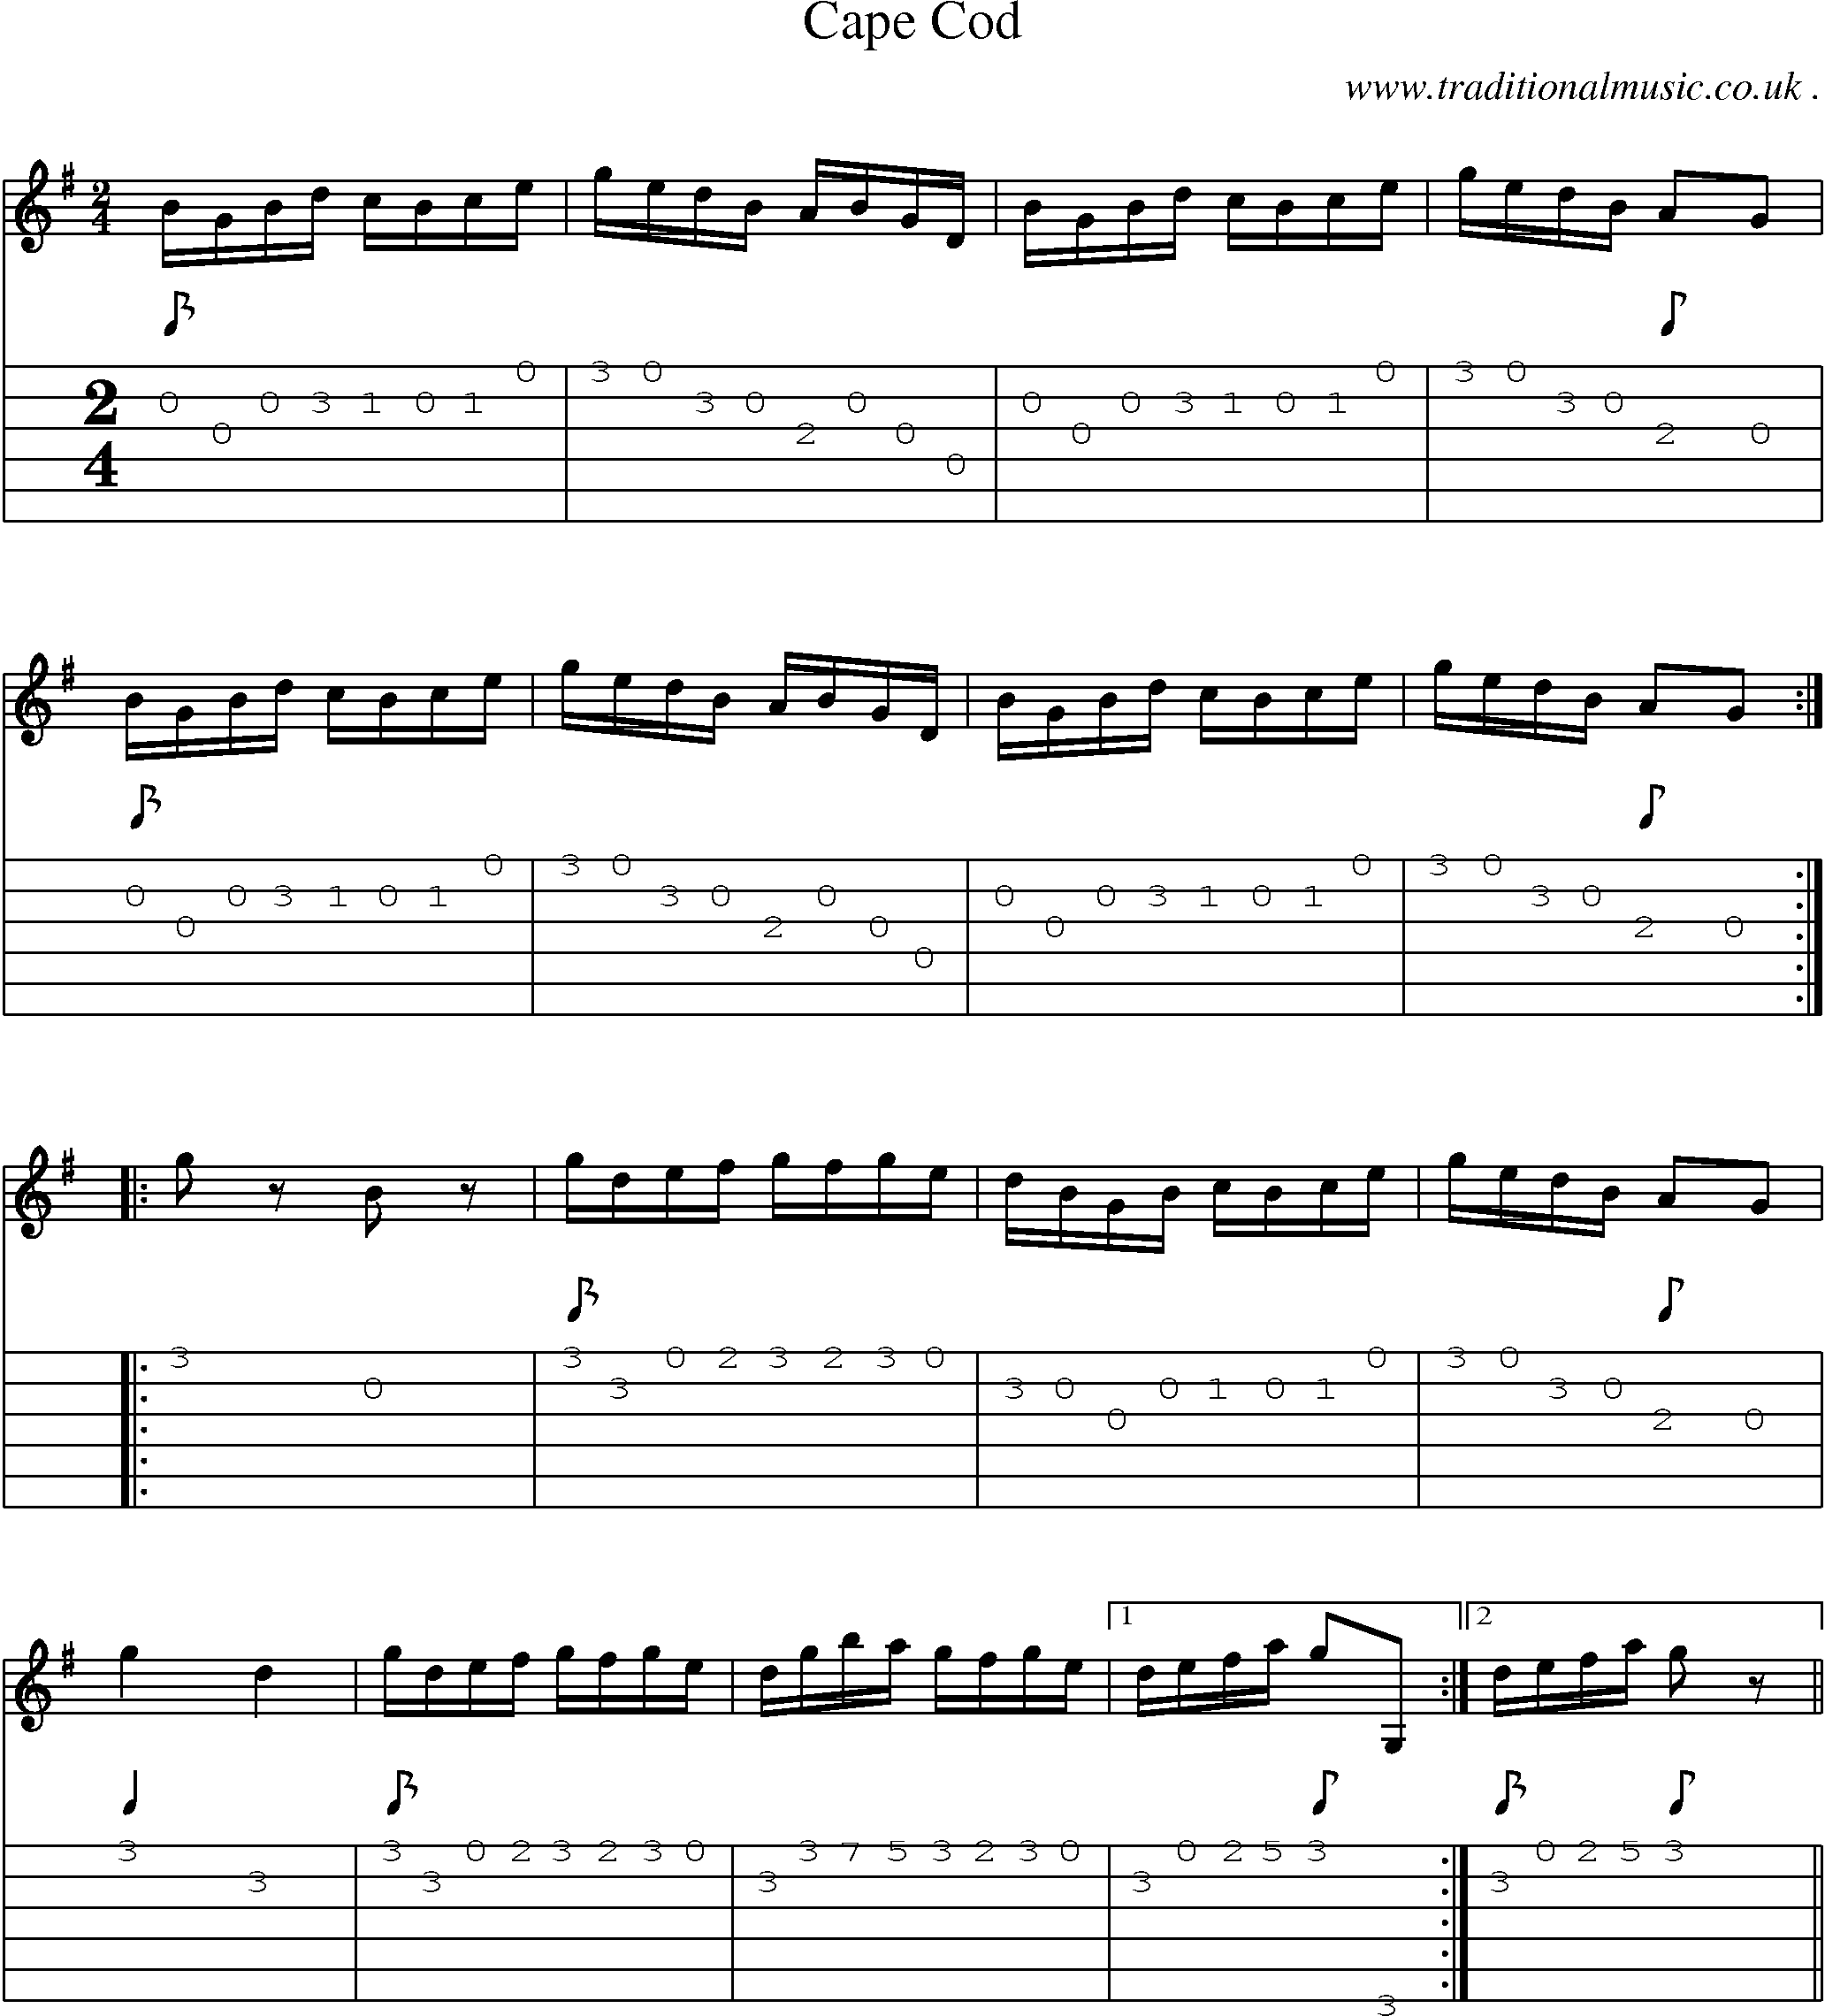 Sheet-Music and Guitar Tabs for Cape Cod